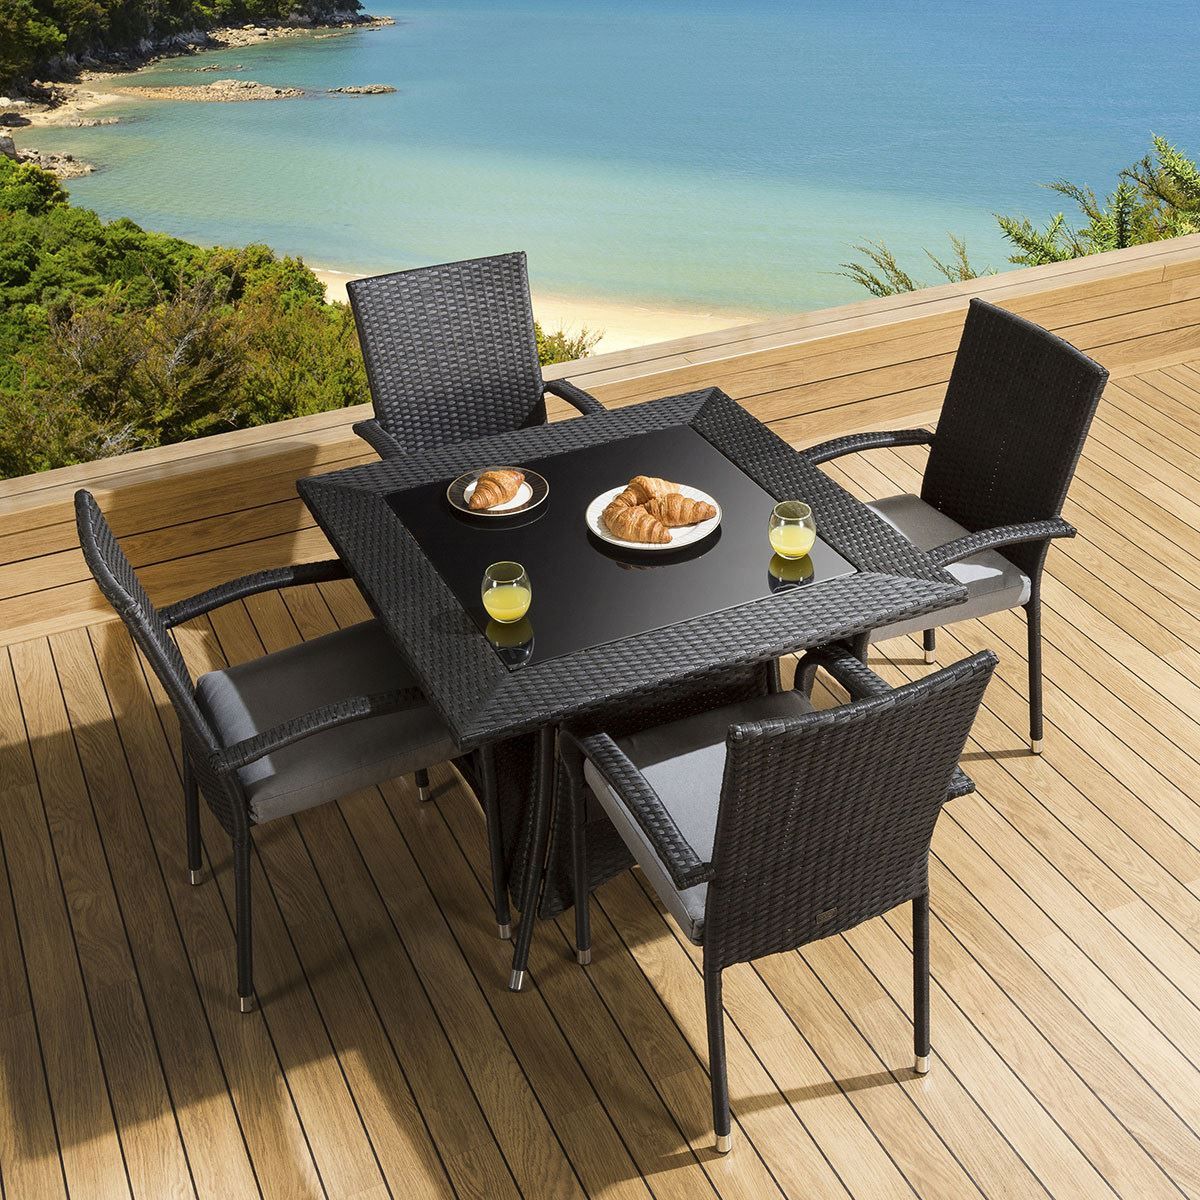 Outdoor Dining Set Square Table 4 Armed Black Chairs Grey Cushions Intended For Black And Gray Outdoor Table And Chair Sets (View 2 of 15)